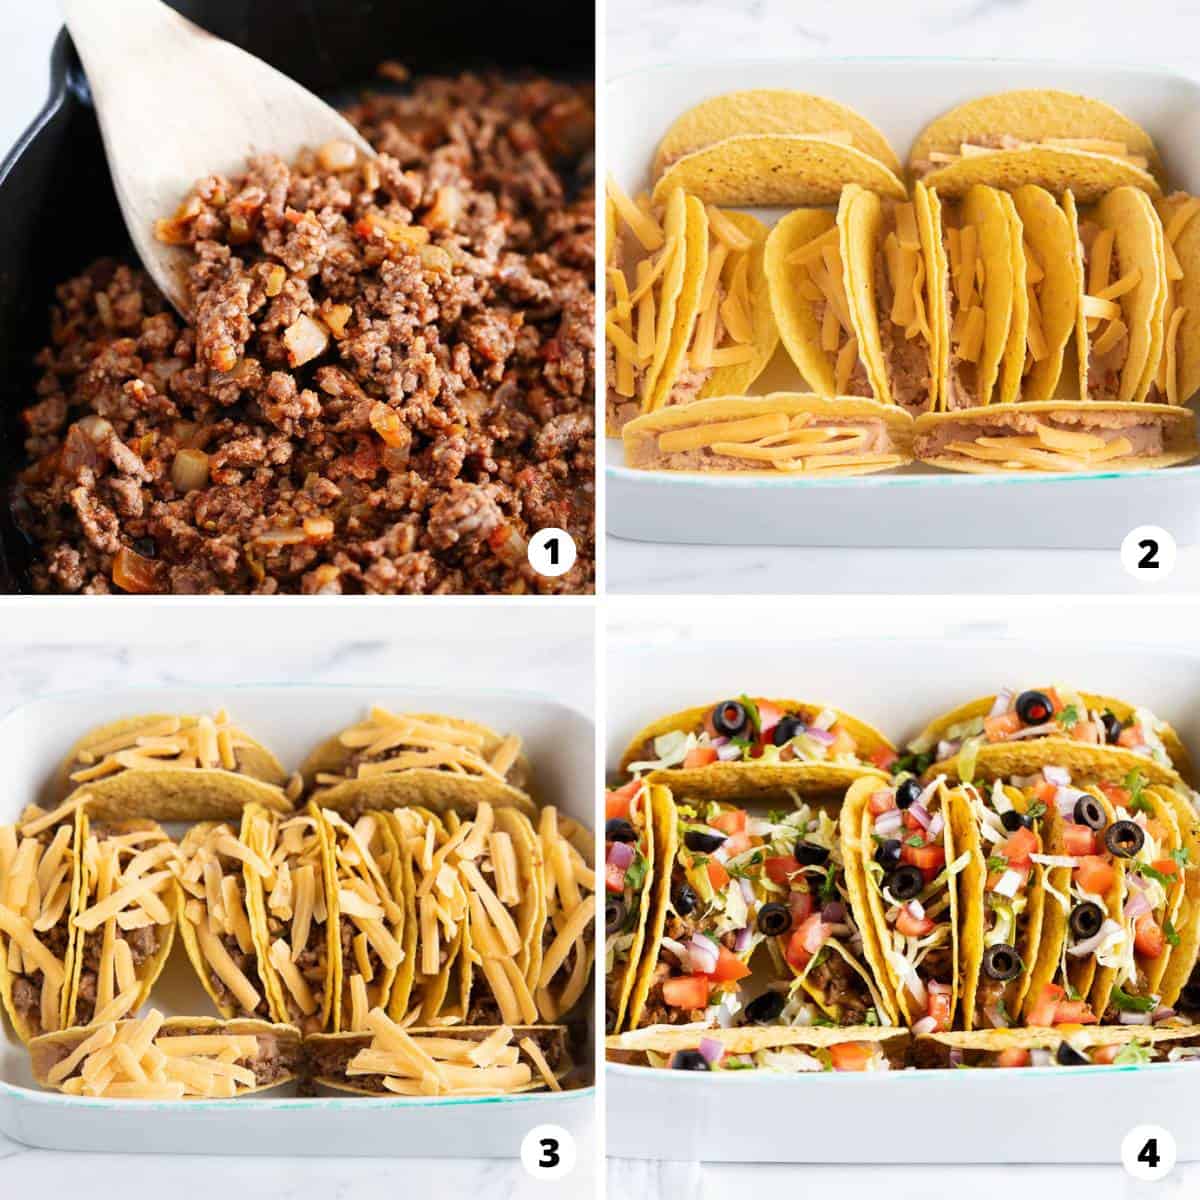 Showing how to make beef tacos in a 4 step collage. 